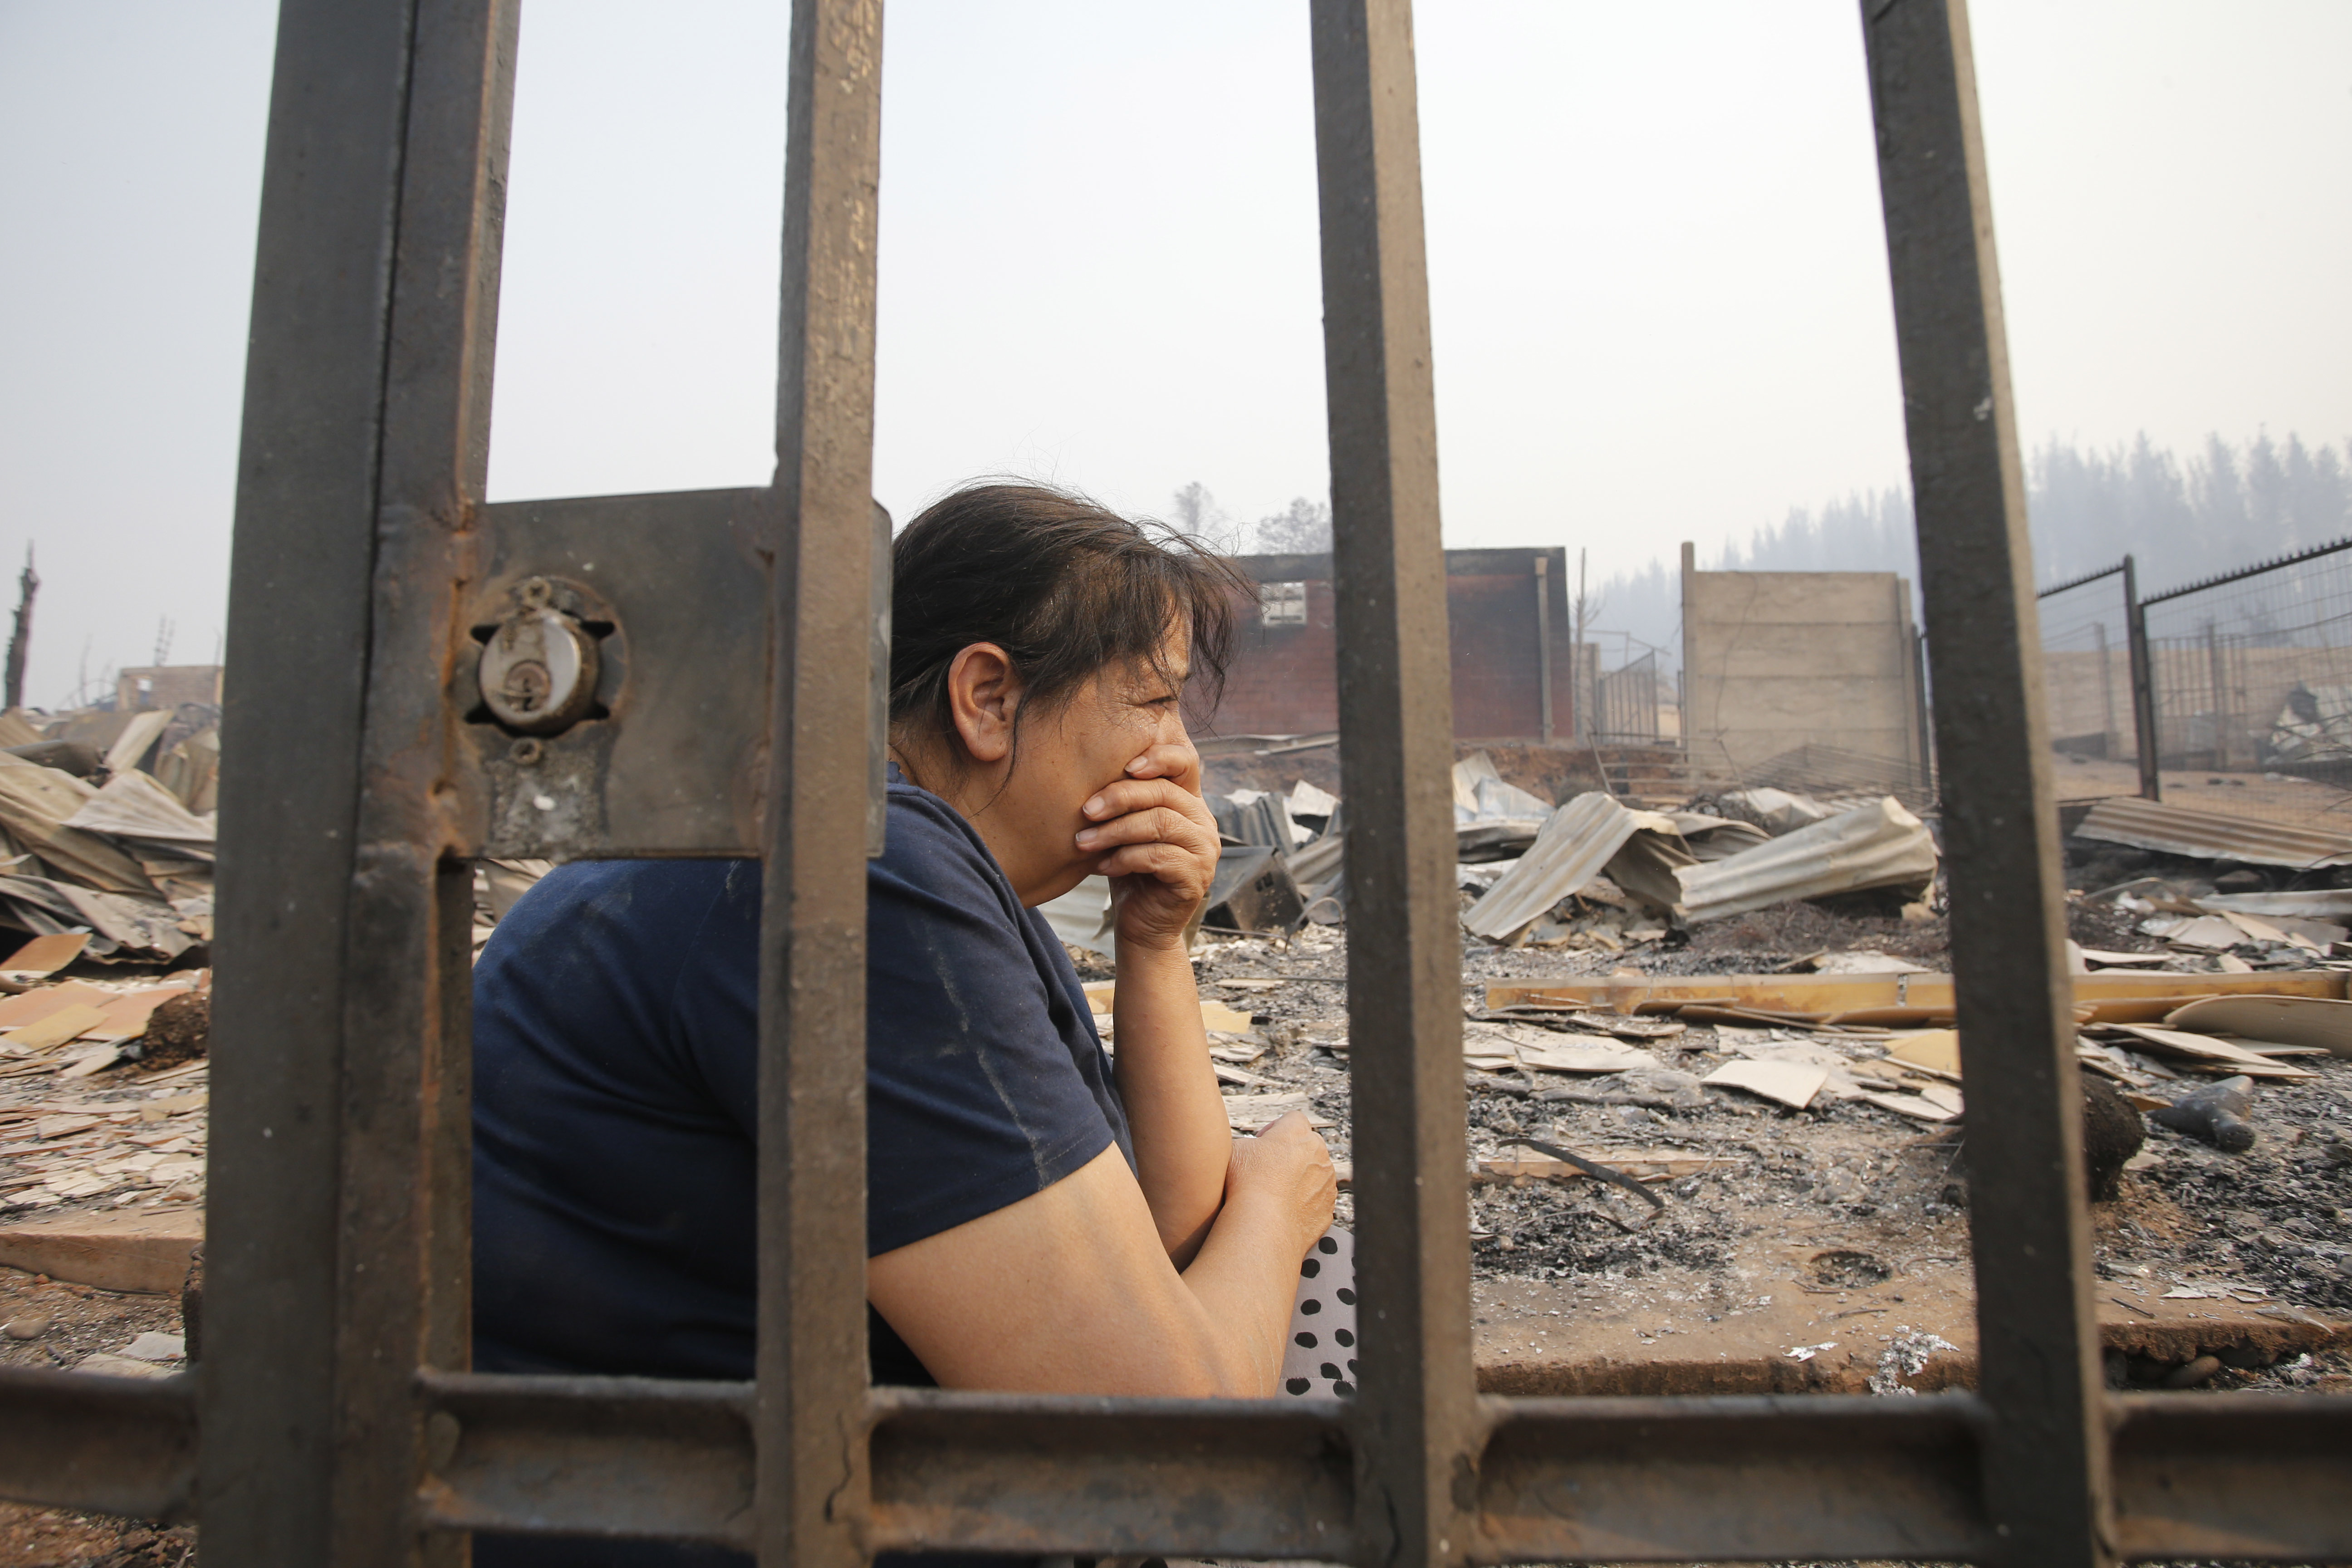 A woman sits on remains of a home destroyed by fire in Santa Olga, Chile, Thursday, Jan. 26, 2017. Chilean officials say that the town of Santa Olga was consumed in the flames of the country's worst wildfires, but its 6,000 residents escaped unharmed. The flames engulfed the post office, a kindergarten, and hundreds of homes Thursday in the town located 220 miles (360 kilometers) south of the Chilean capital. (Javier Torres/Aton via AP) NO PUBLICAR EN CHILE - CHILE OUT